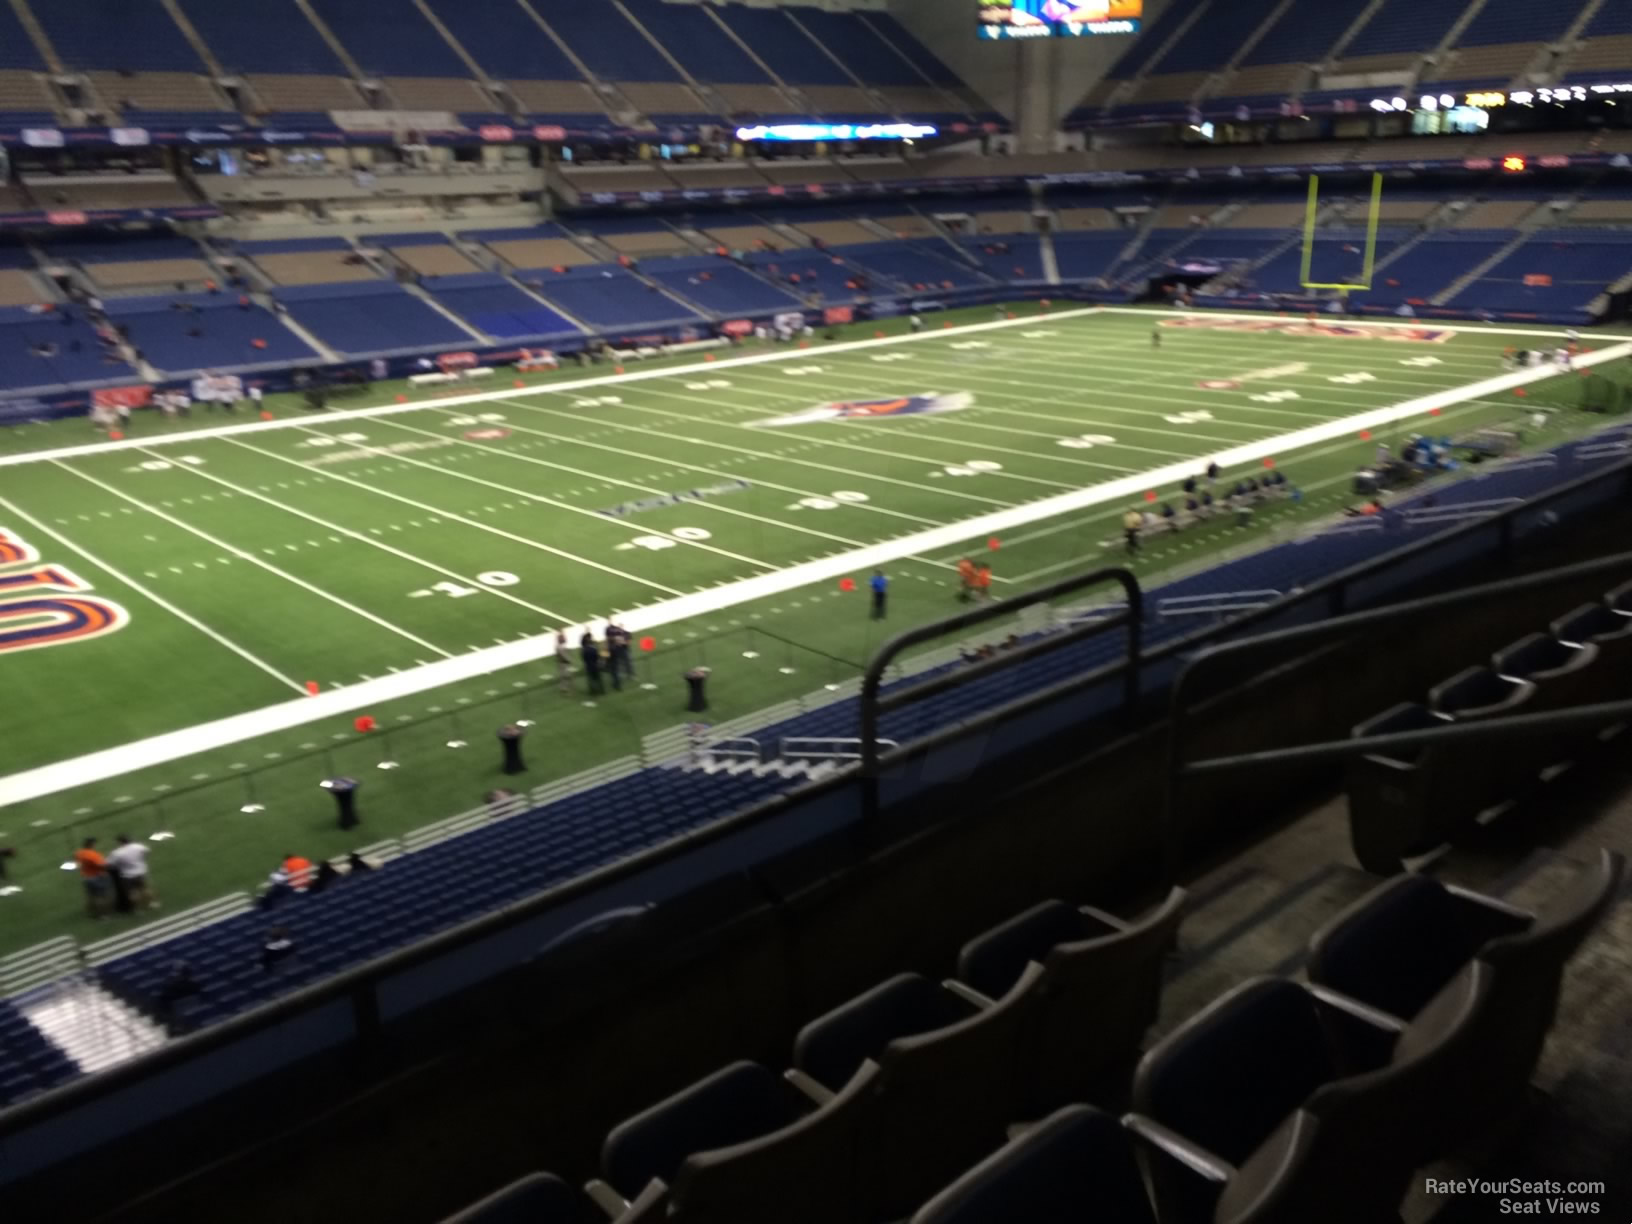 section 239, row 5 seat view  for football - alamodome